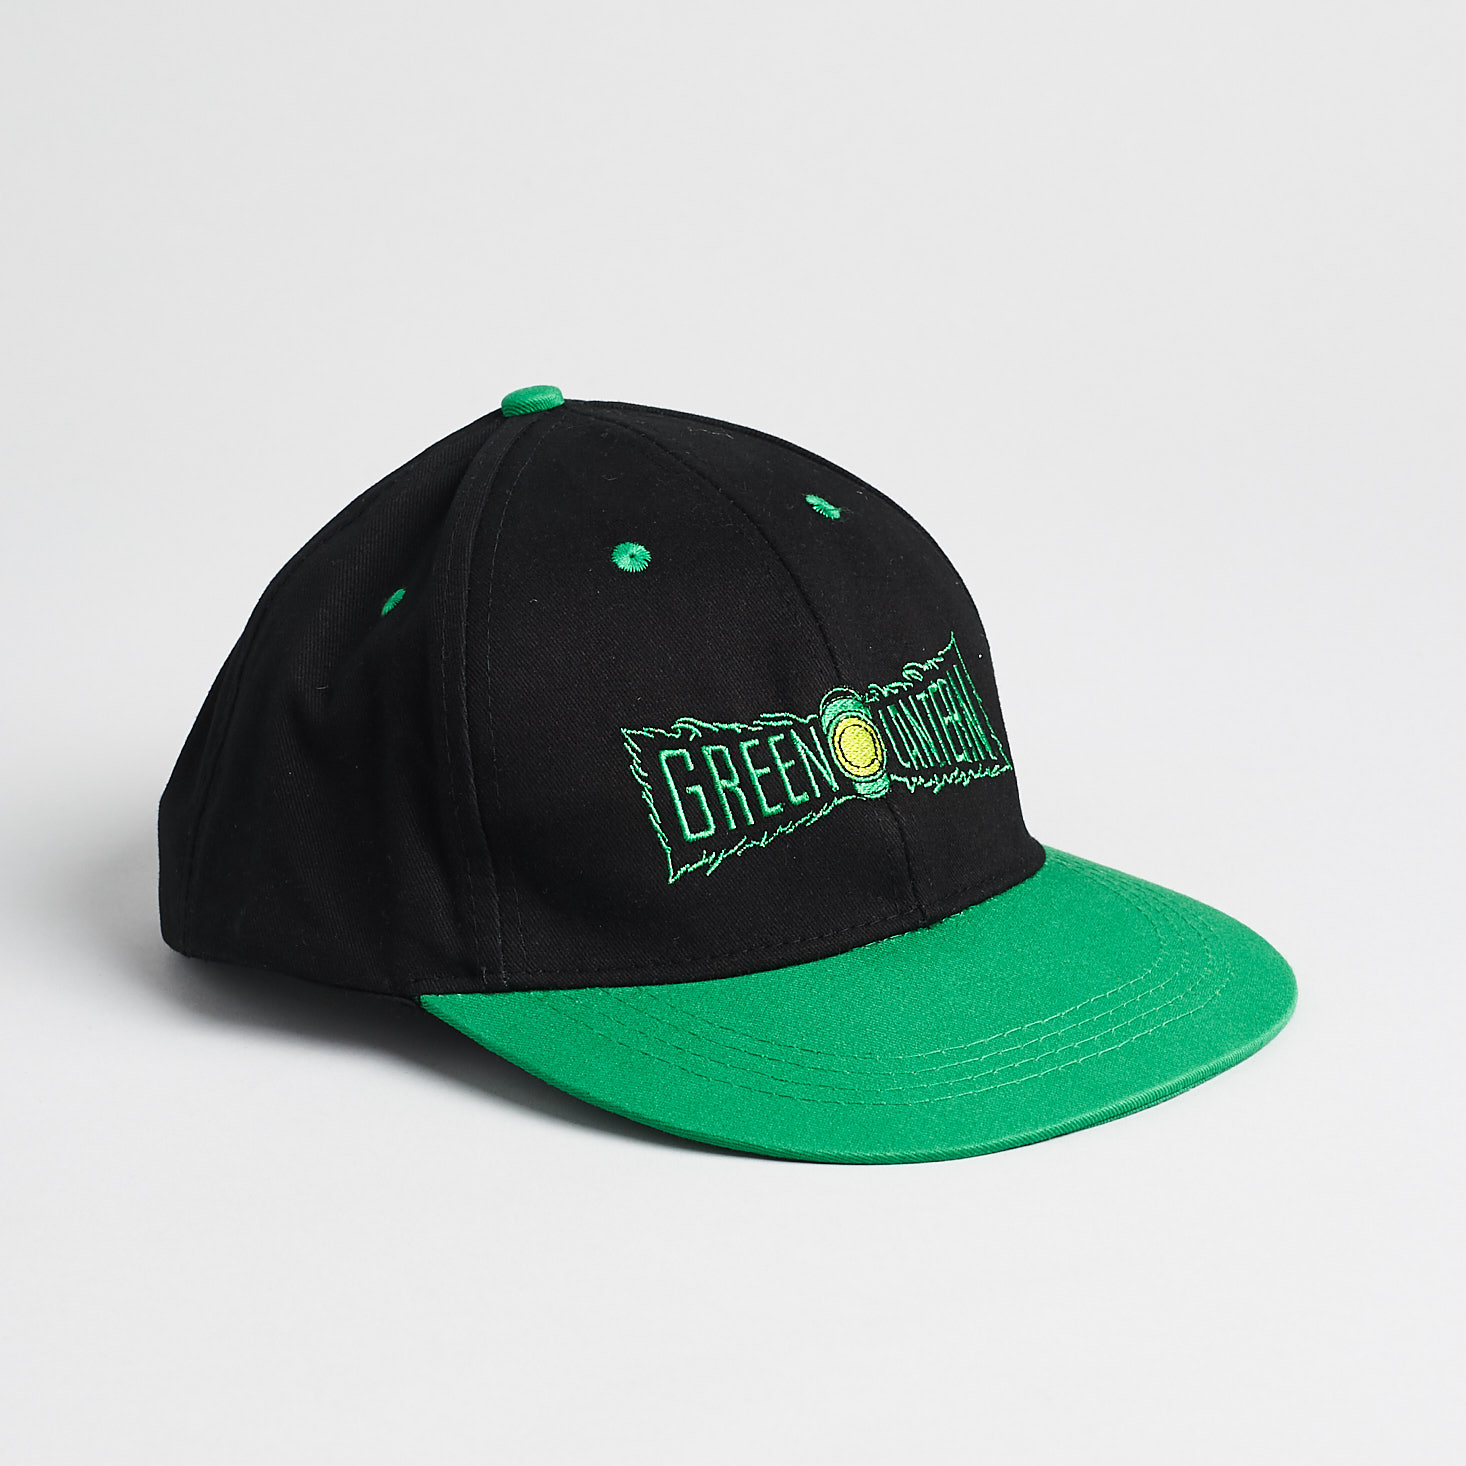 Worlds Finest Collection Green Lantern May 2019 review hat